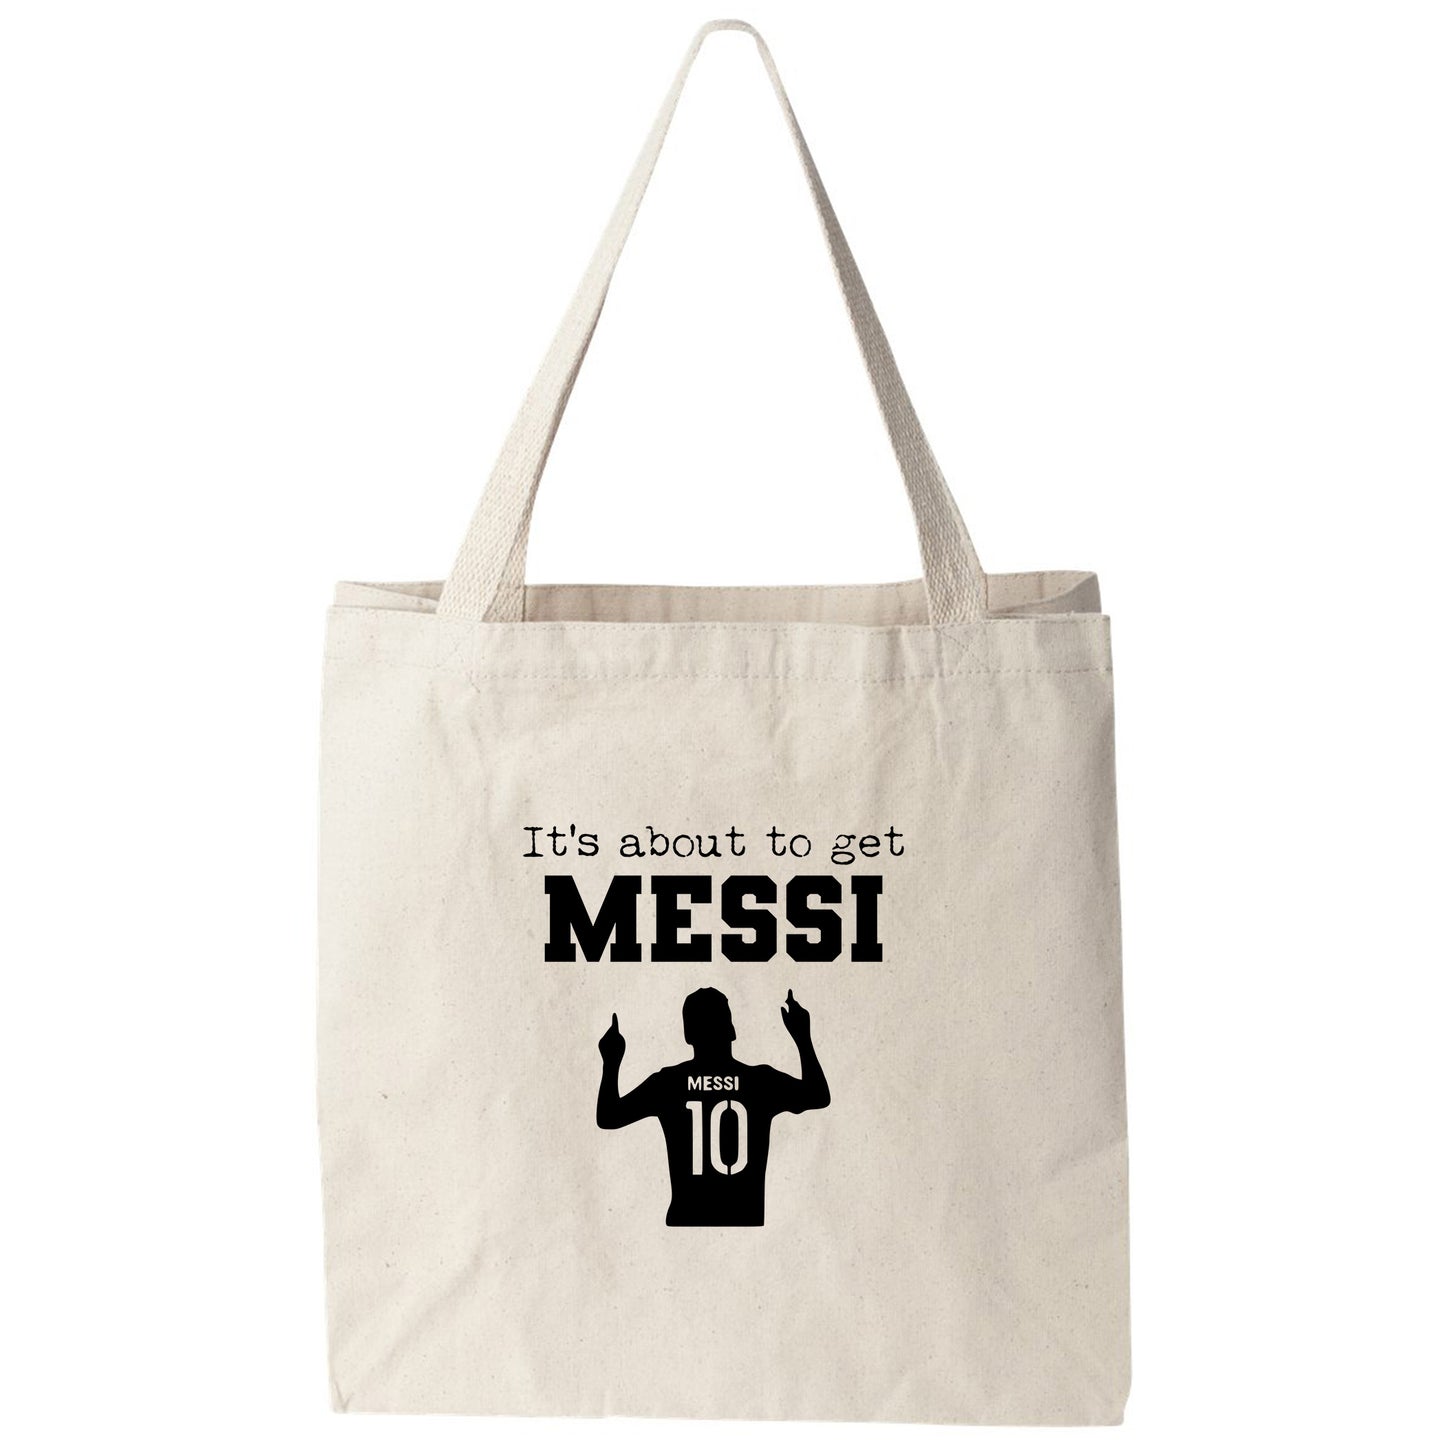 a tote bag that says it's about to get messi 10